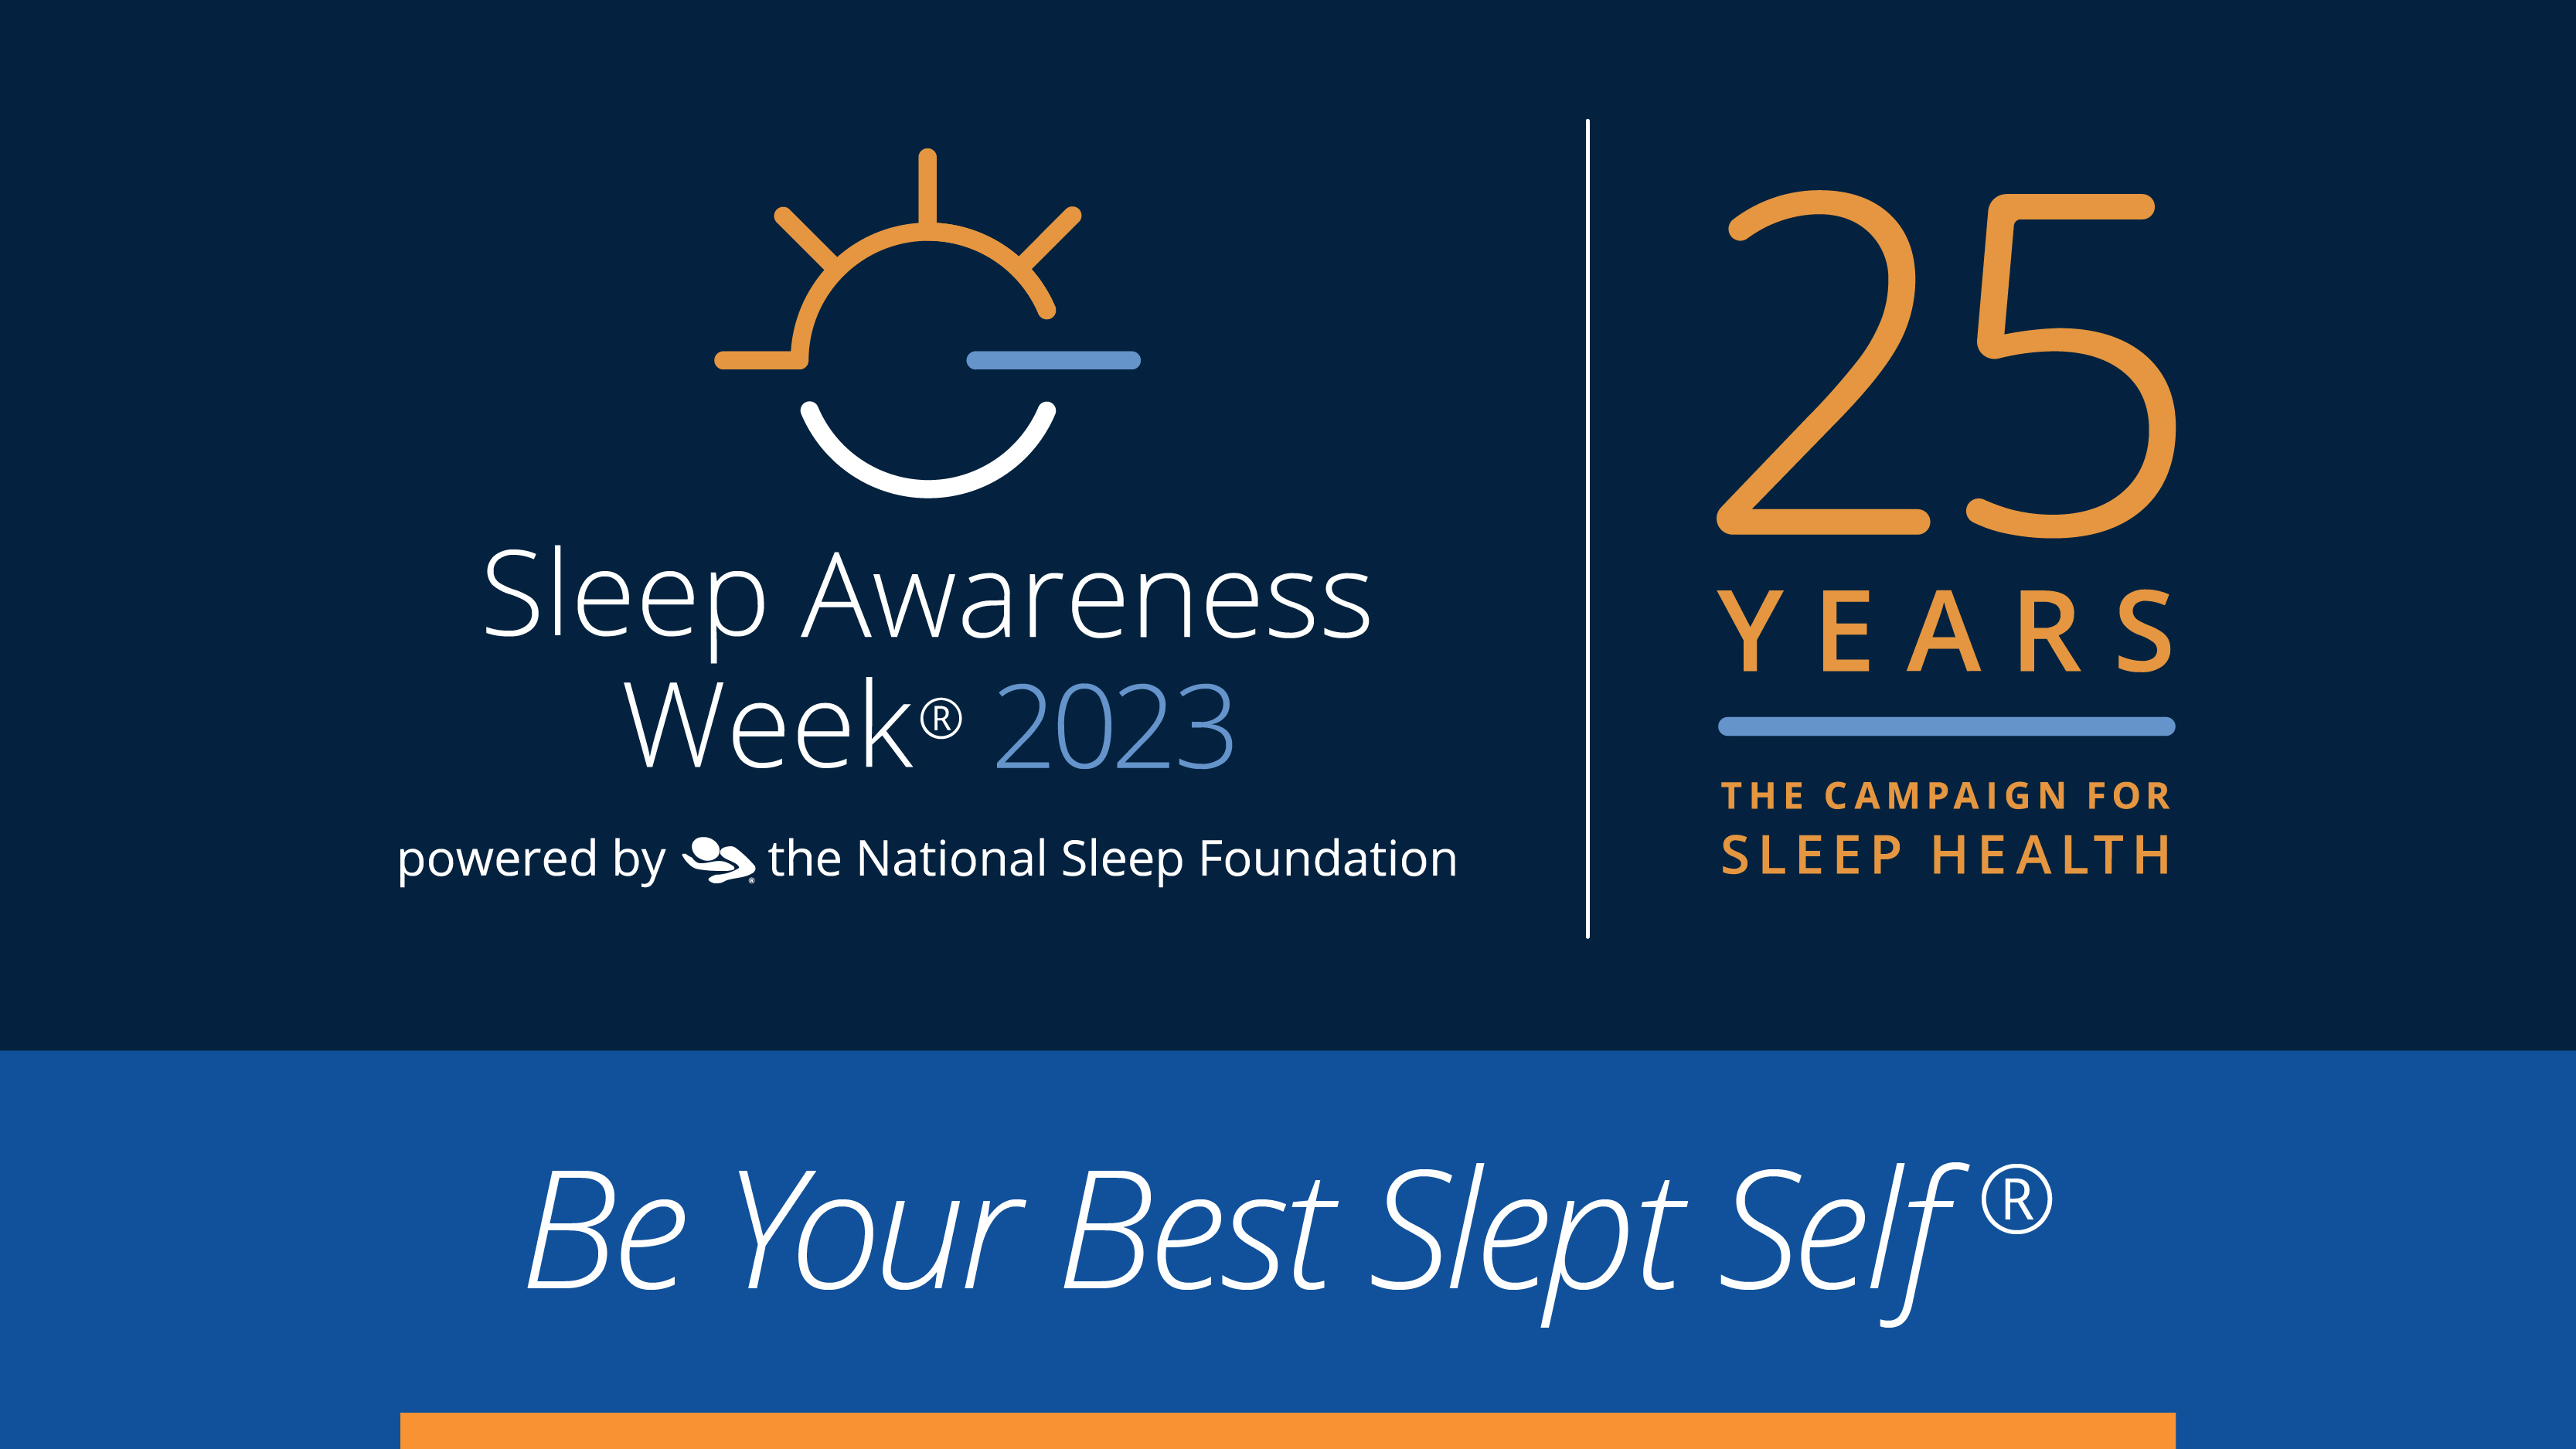 National Sleep Foundation’s Best Slept Self™ campaign